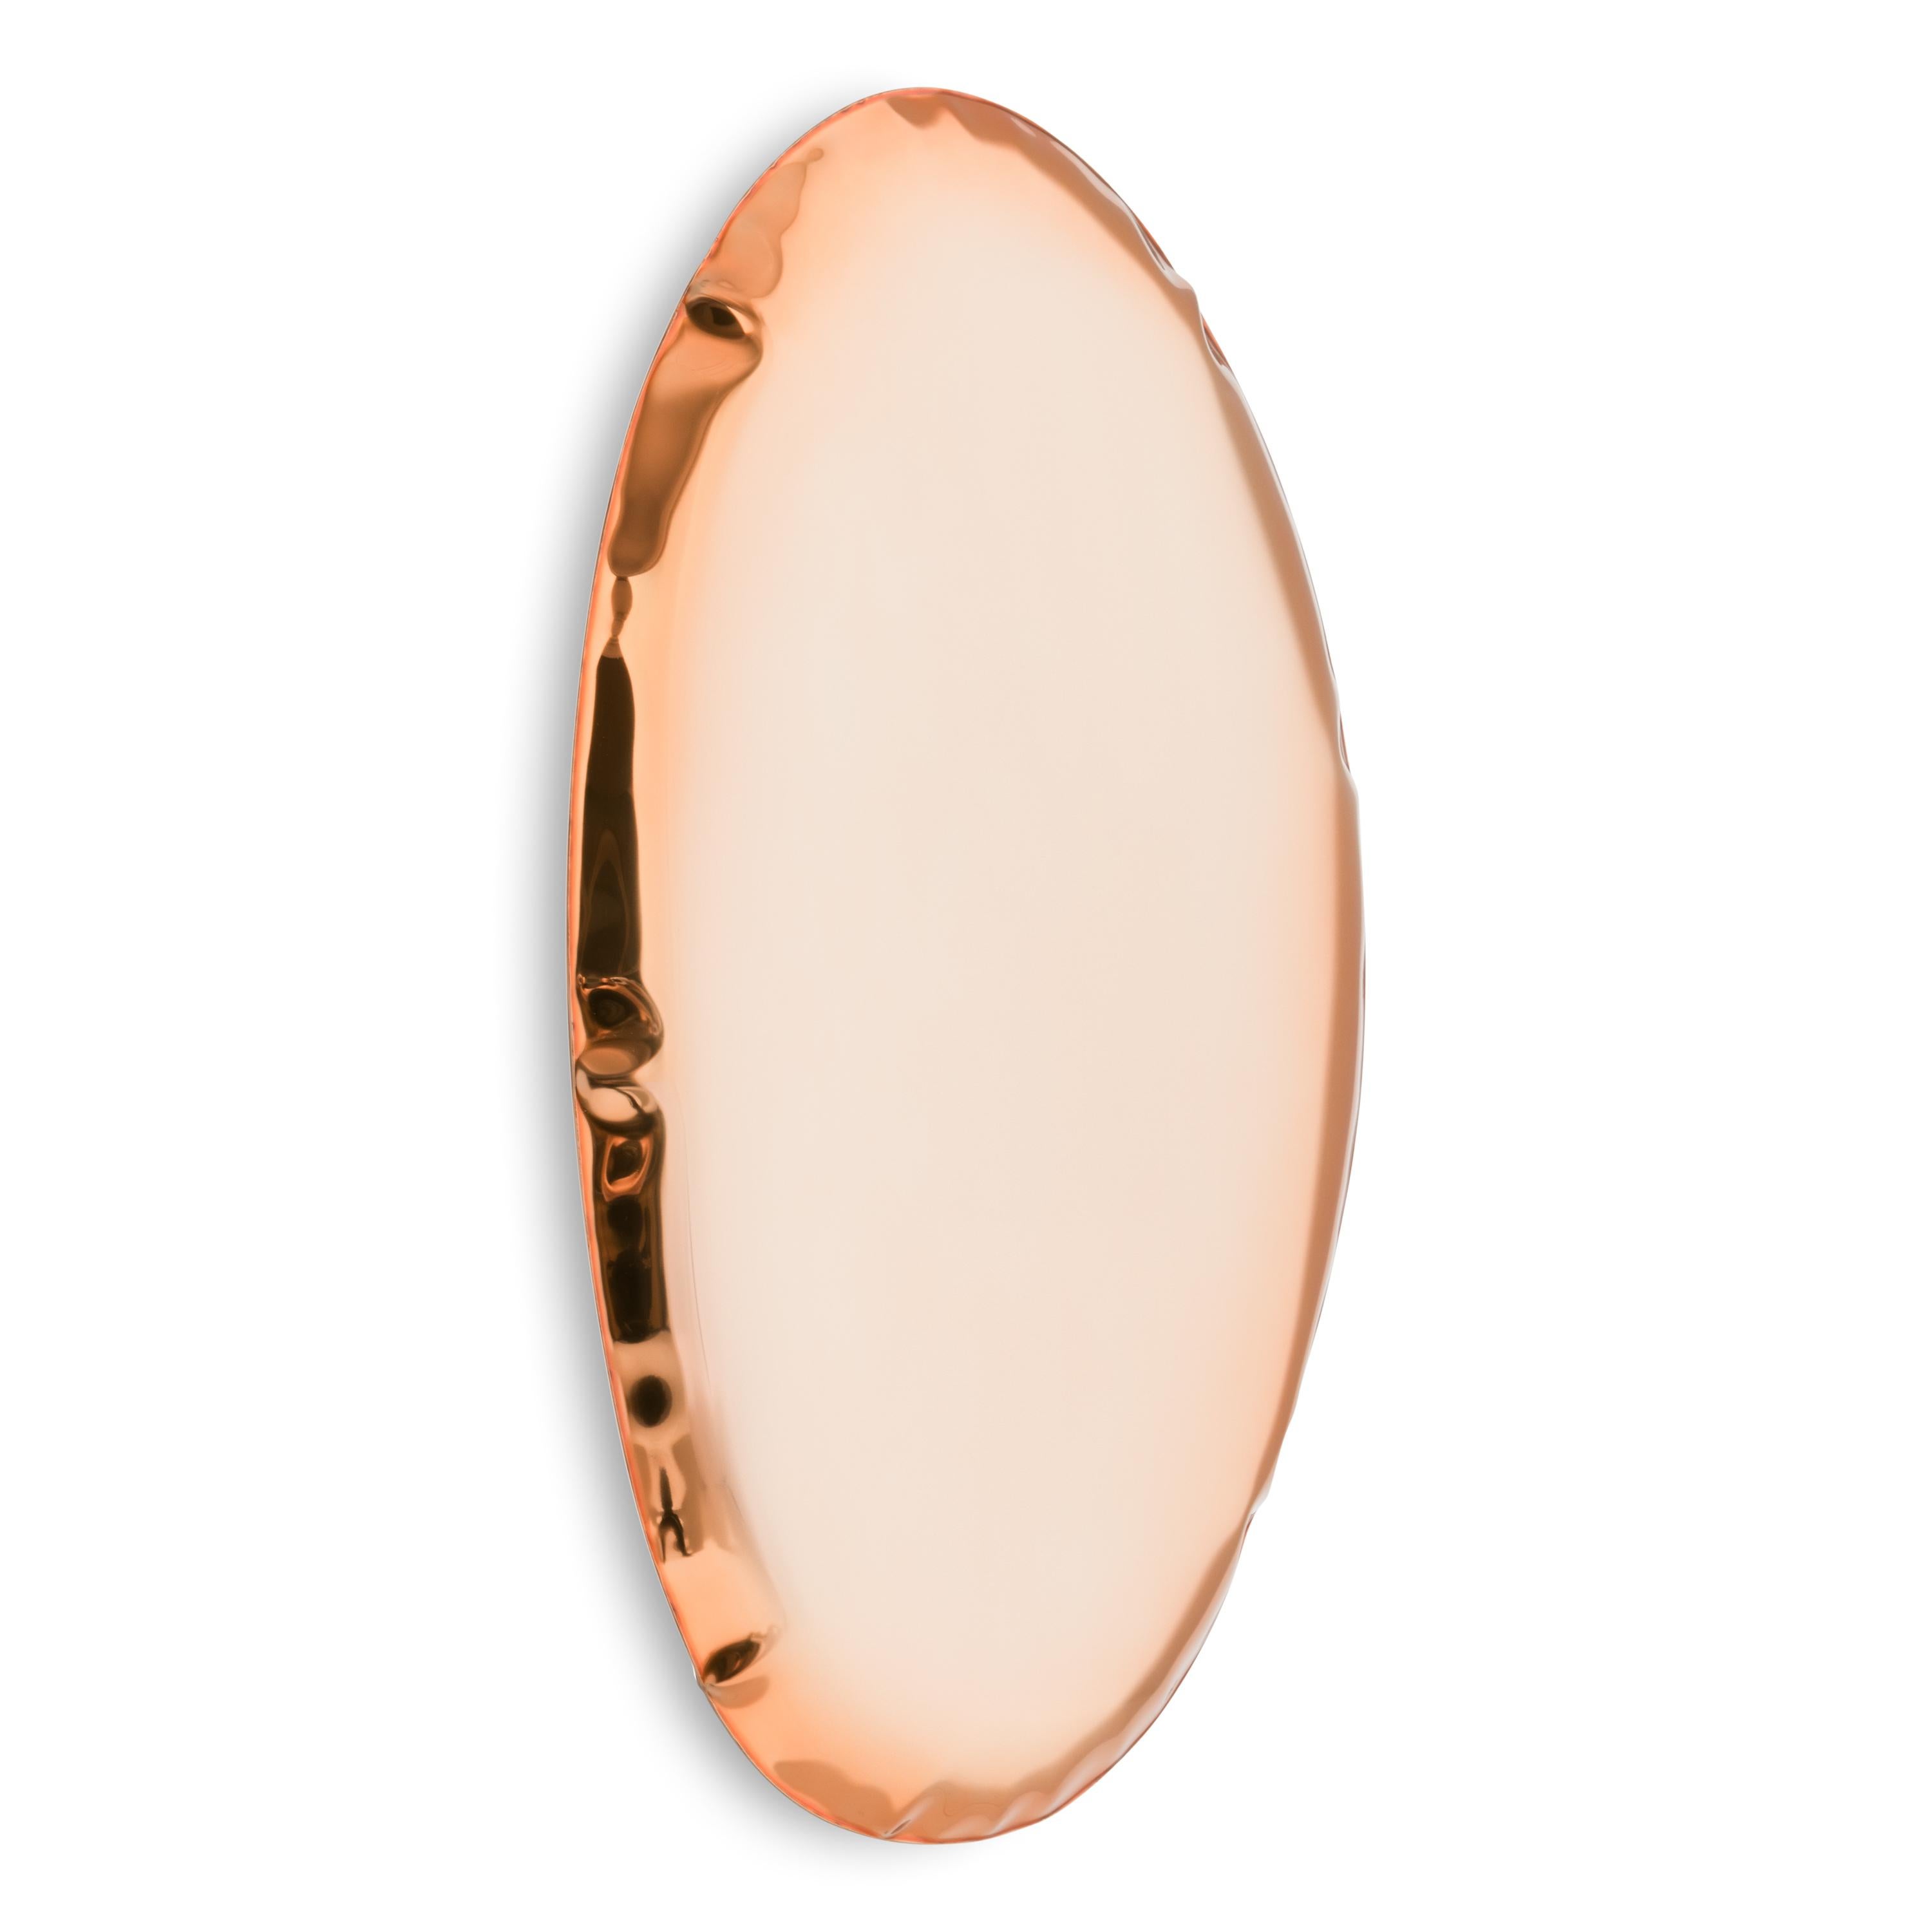 Stainless Steel Contemporary Mirror 'Tafla O5', AURUM Collection, Rose Gold, by Zieta For Sale